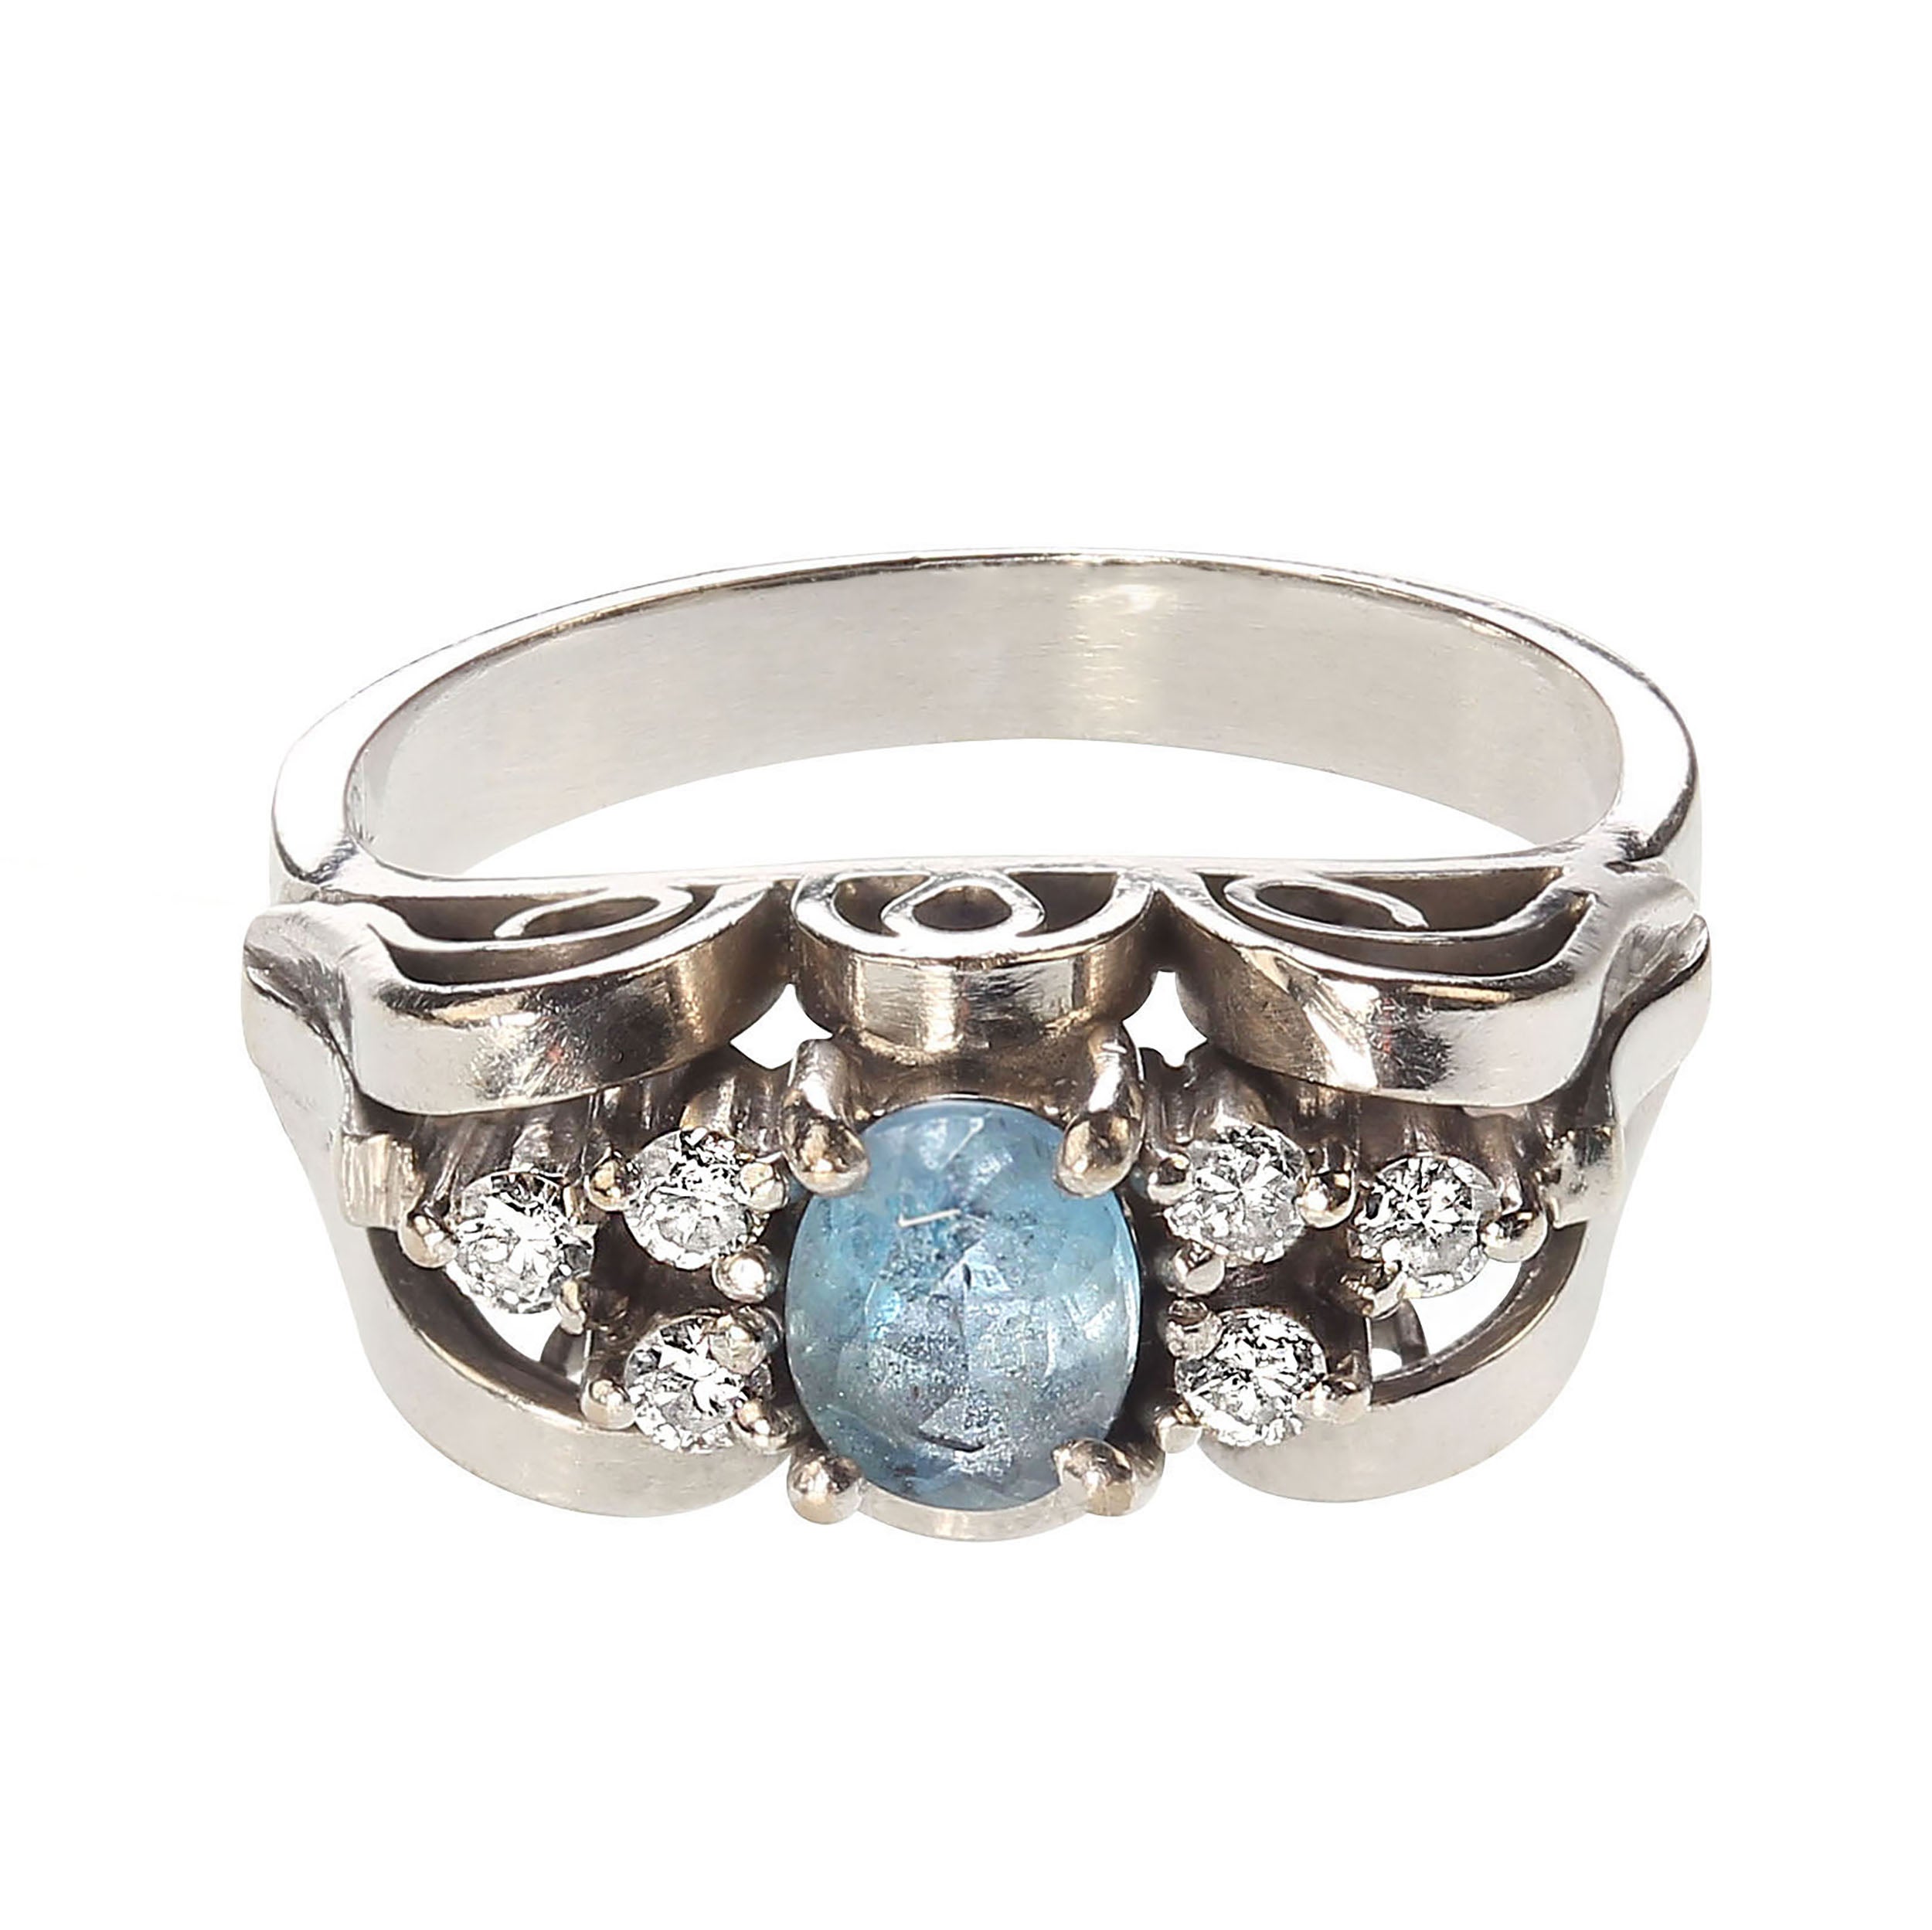 This beautiful ring was created in Brazil with a gorgeous local aquamarine.  The intensely blue, 5x3mm, aquamarine is accented with three diamonds on each side.  The lovely scrolly work in 18K white gold sets the gemstones up from the shank of the